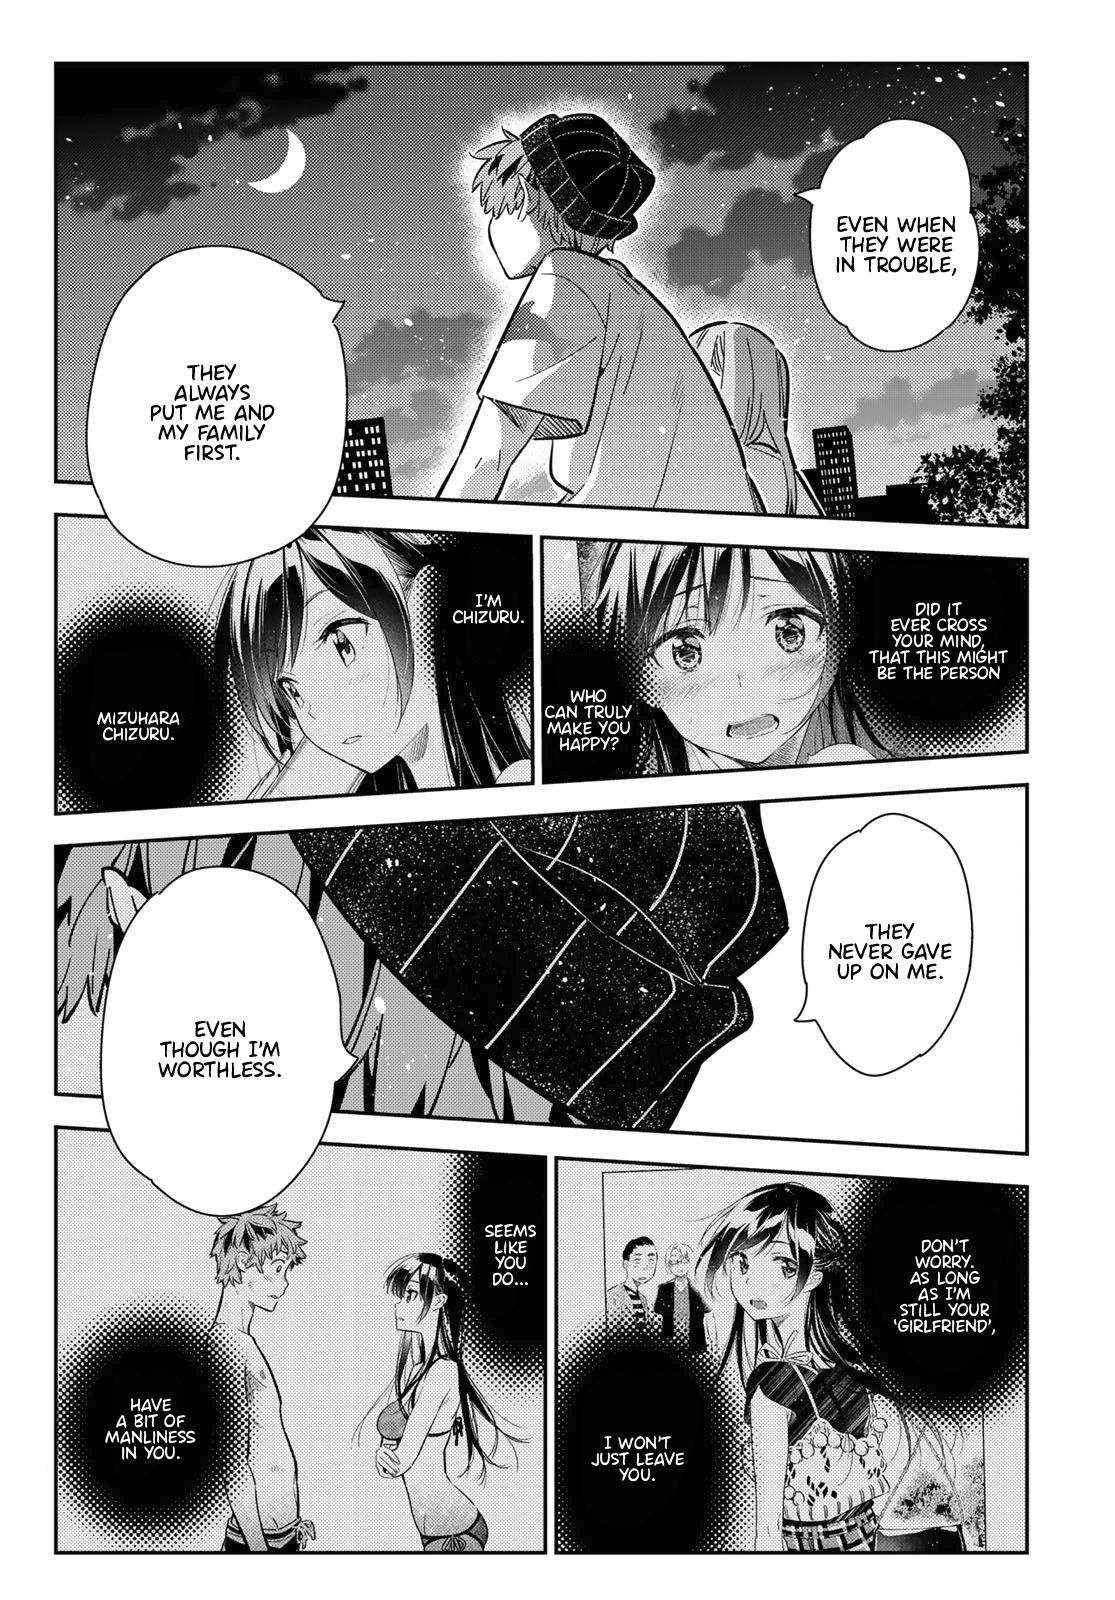 Rent A GirlFriend, Chapter 98 image 011